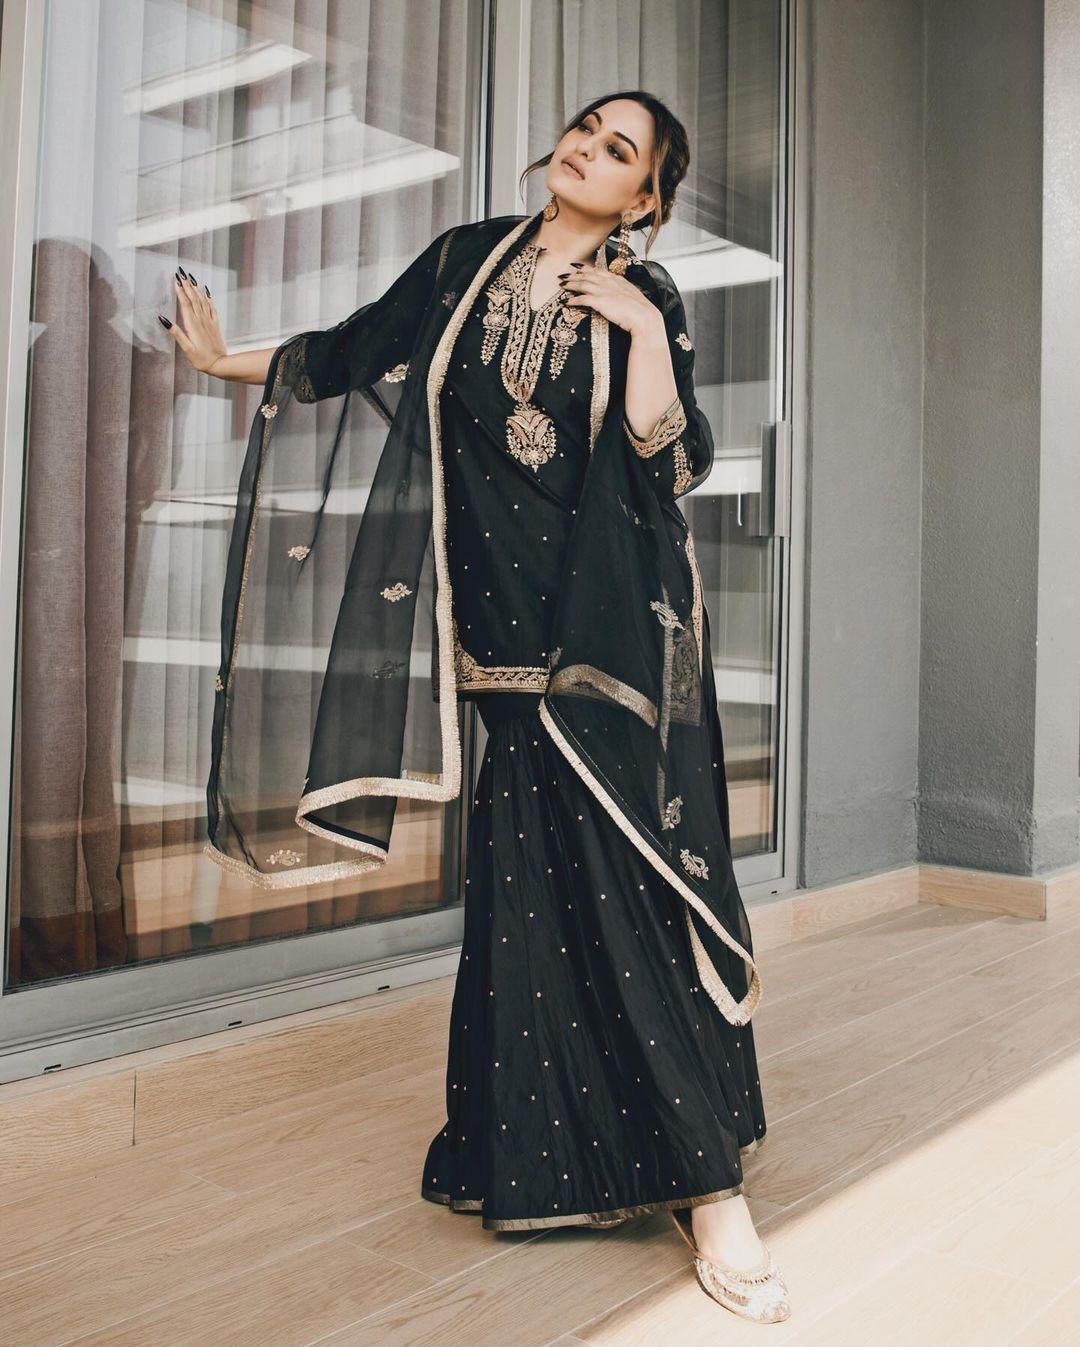 Sonakshi Sinha aces her look. The actress opted for a black suit paired with a matching skirt and sheer dupatta